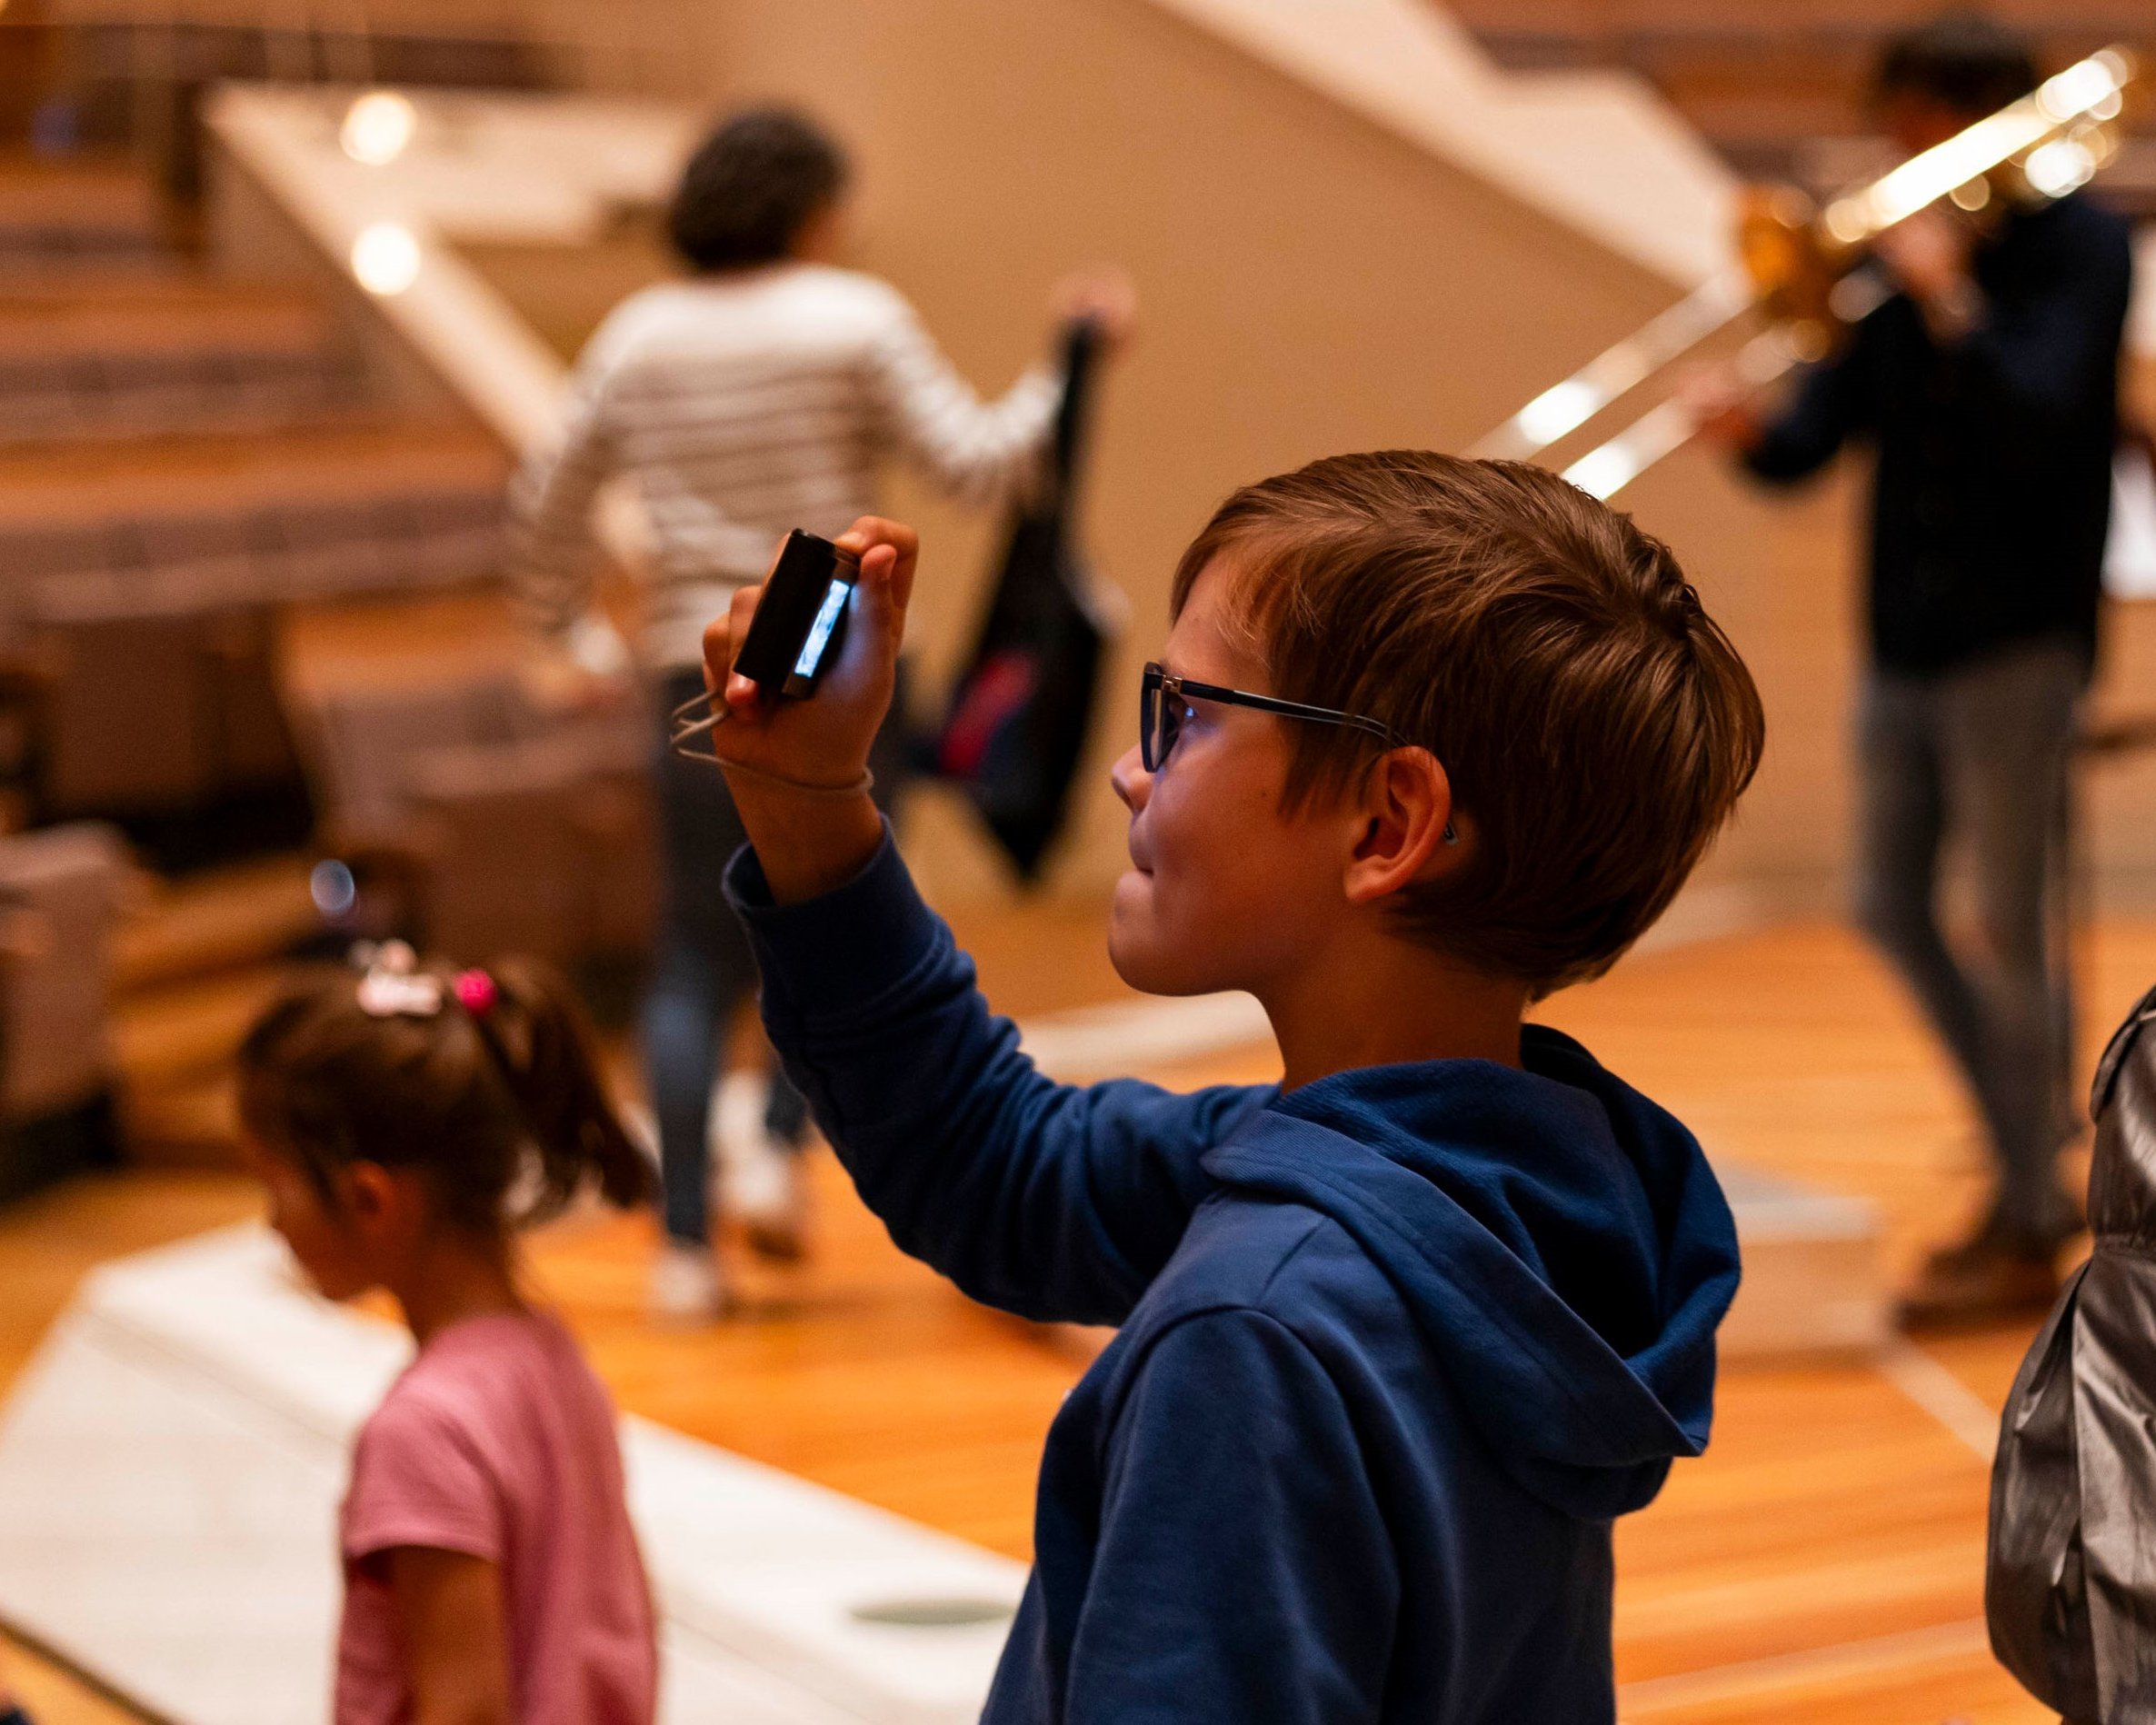 Boy takes a photo with his mobile phone in the Philharmonie.